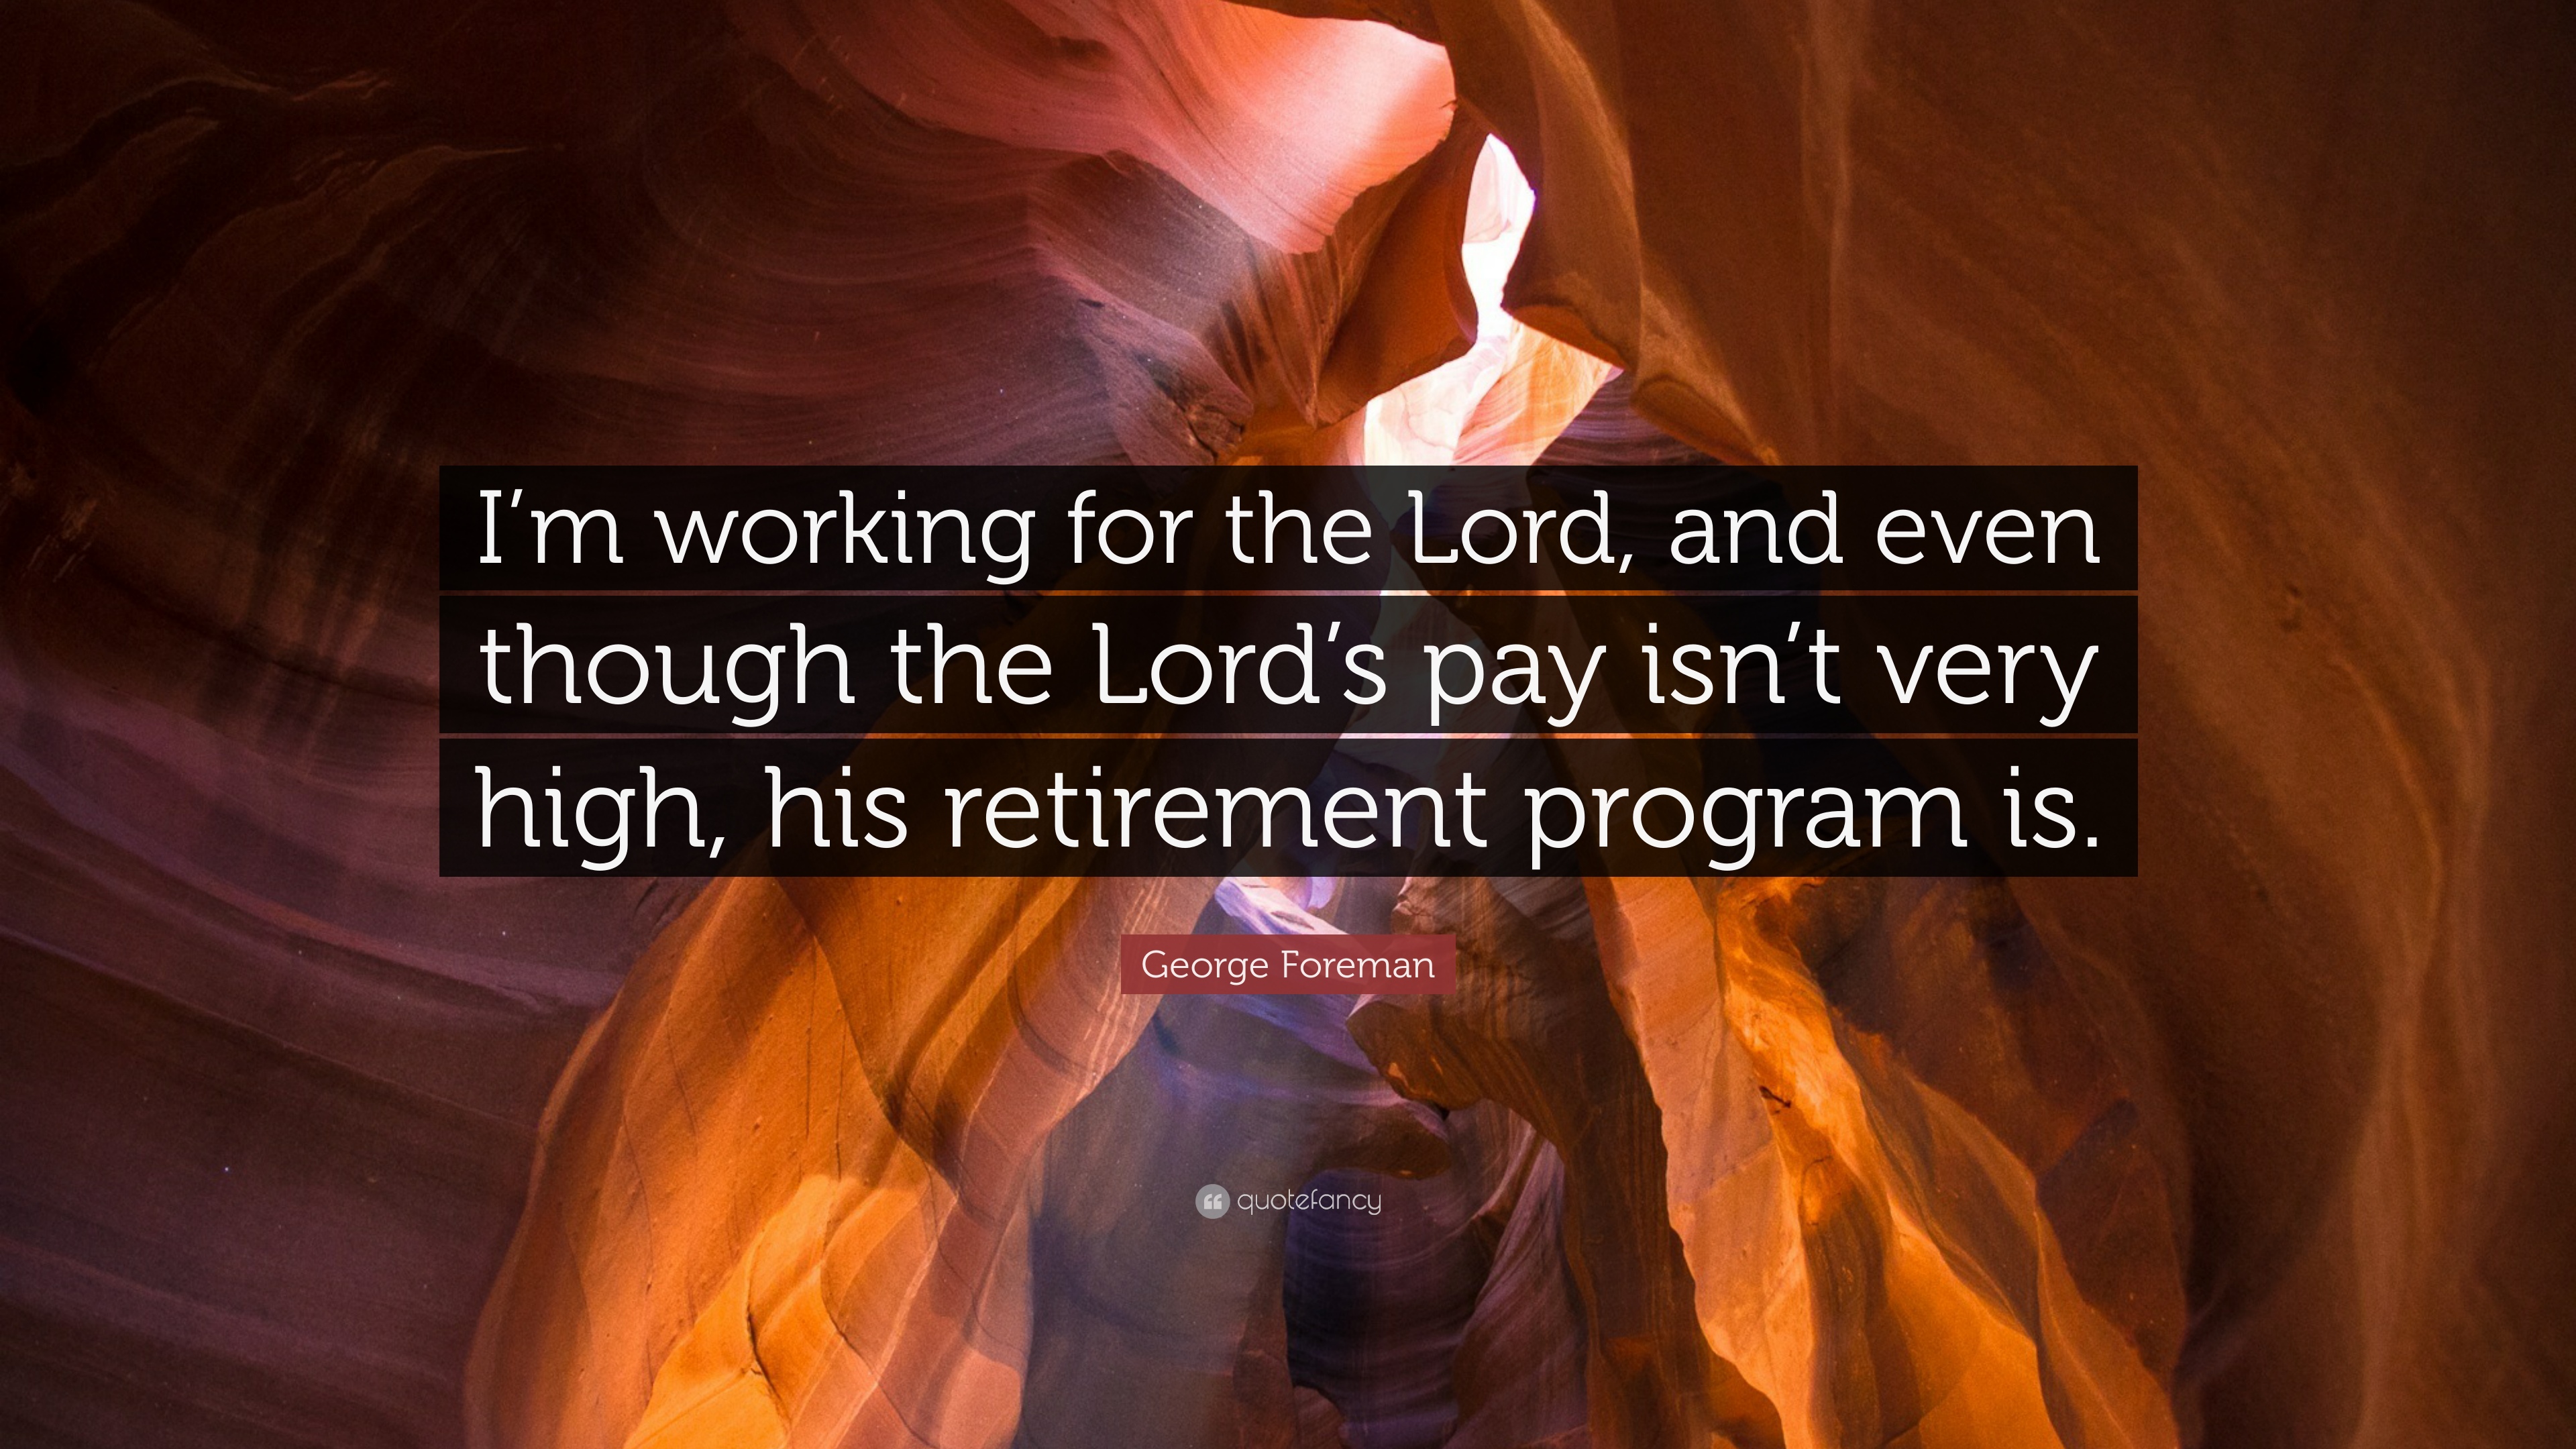 George Foreman Quote: “I'm working for the Lord, and even